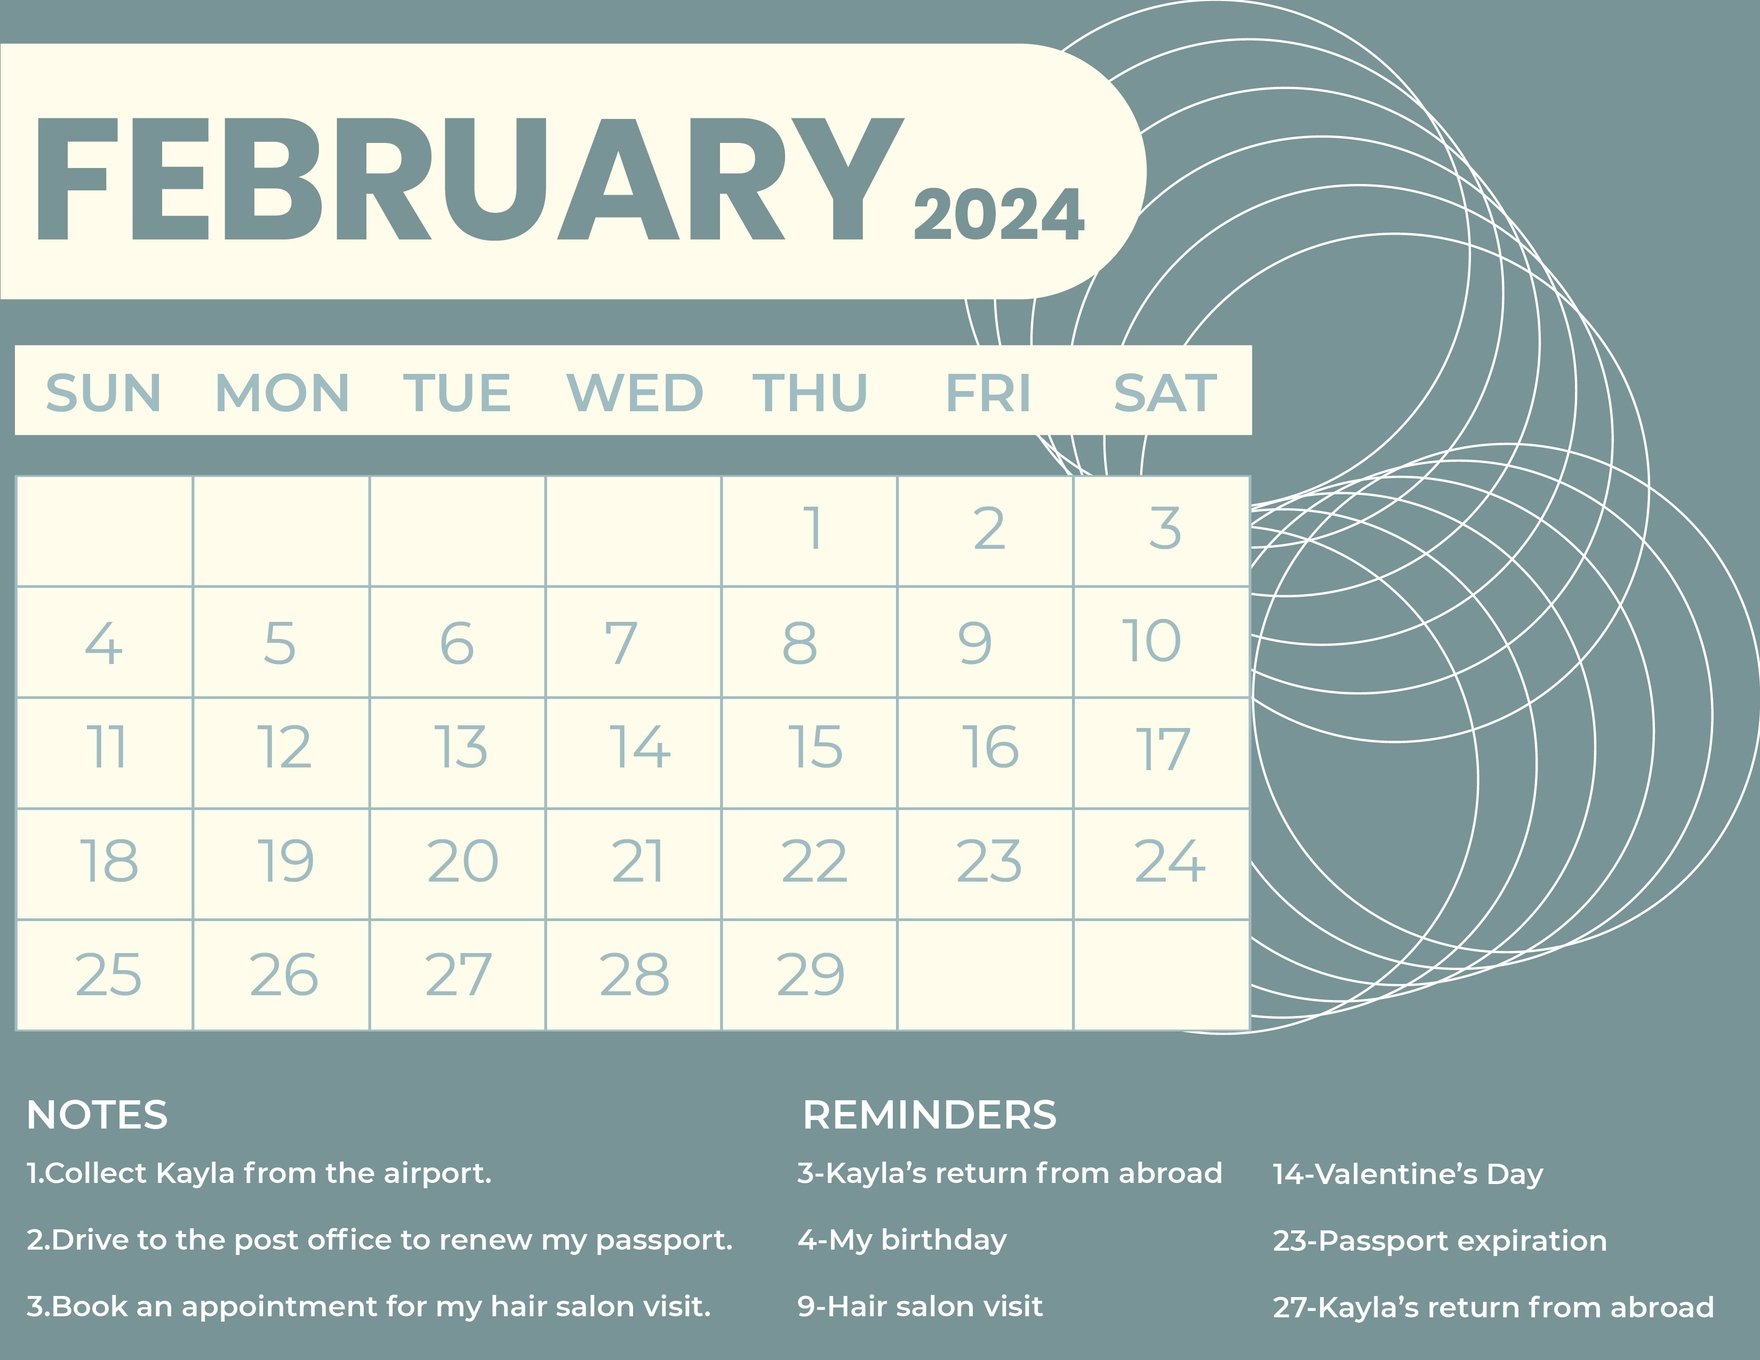 FREE February 2024 Calendar Template Download in Word, Google Docs